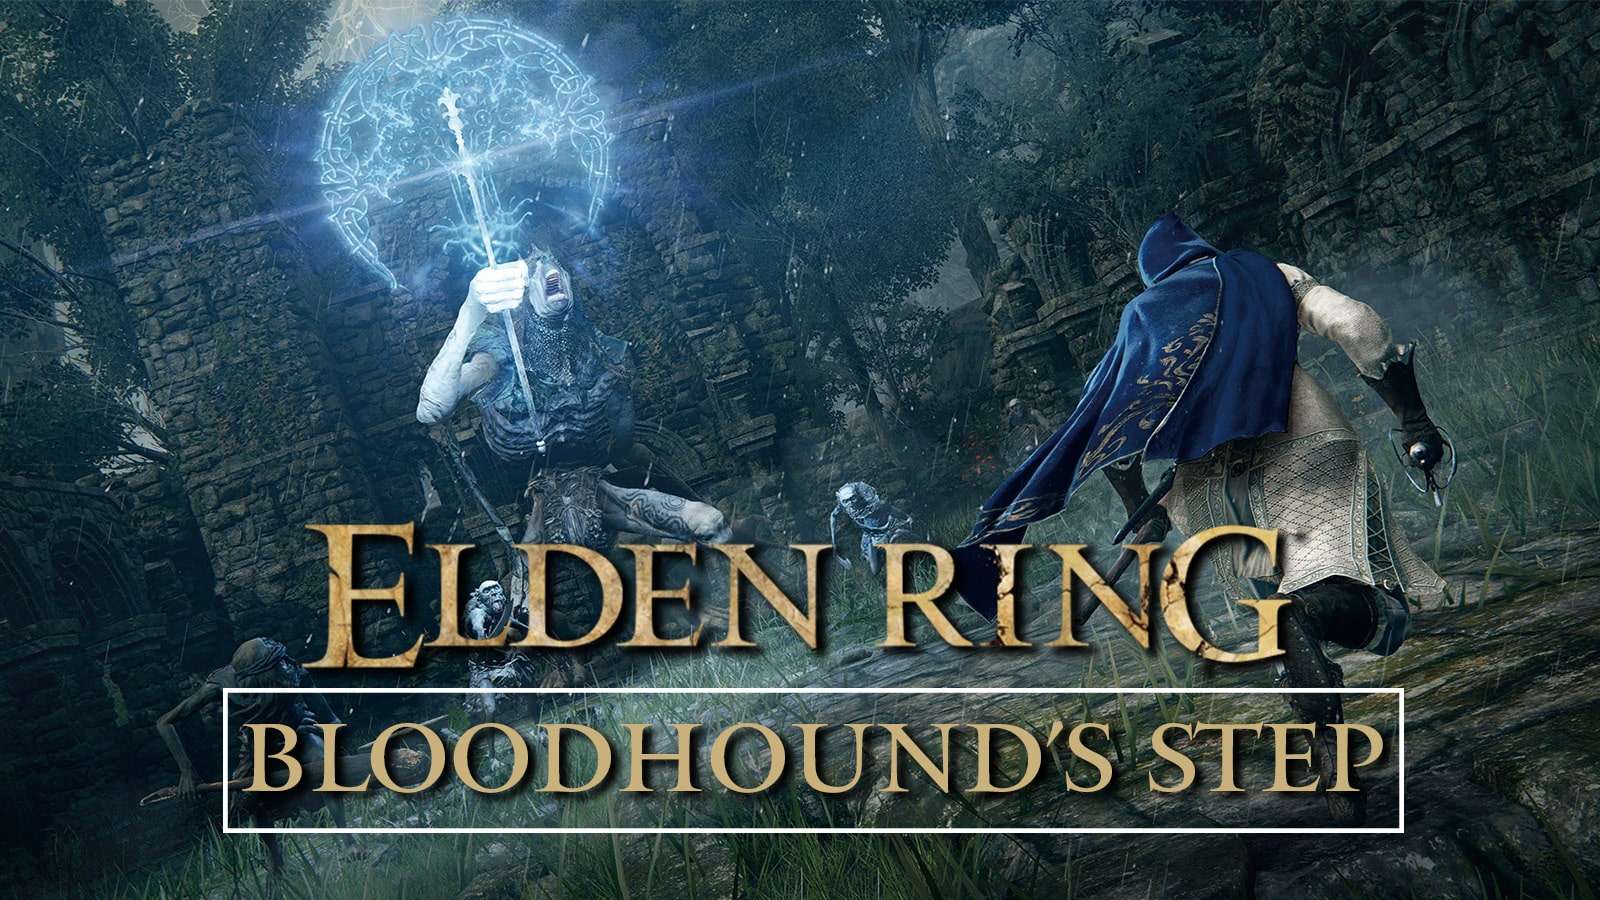 elden-ring-bloodhounds-step-ashes-of-war